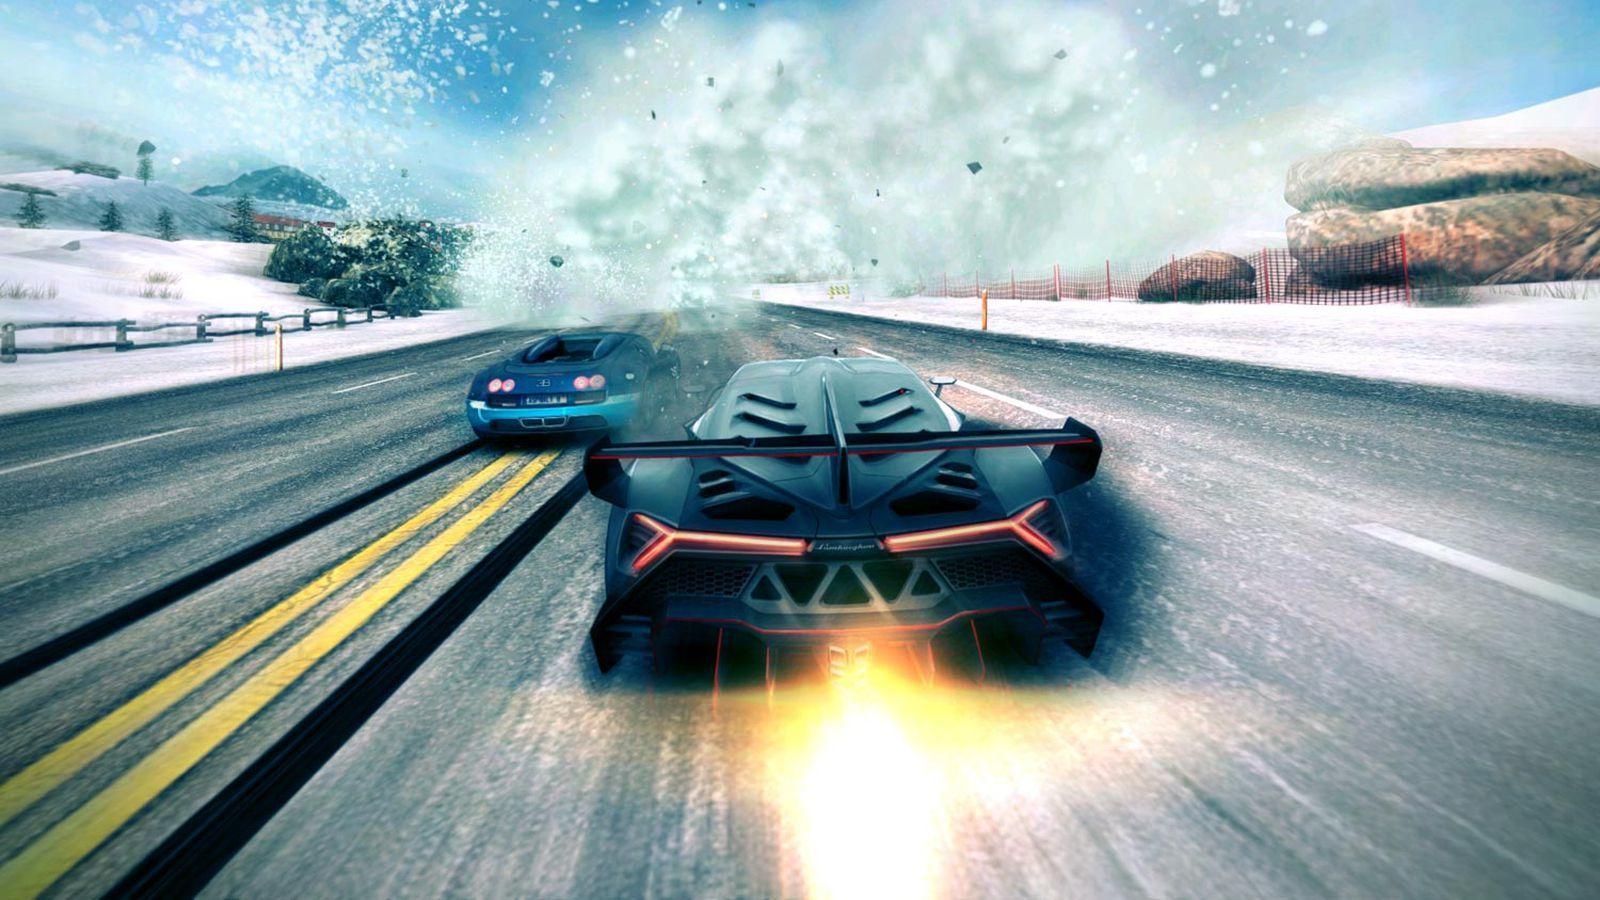 Gameloft brings Asphalt 8 and two other games to Amazon Fire TV